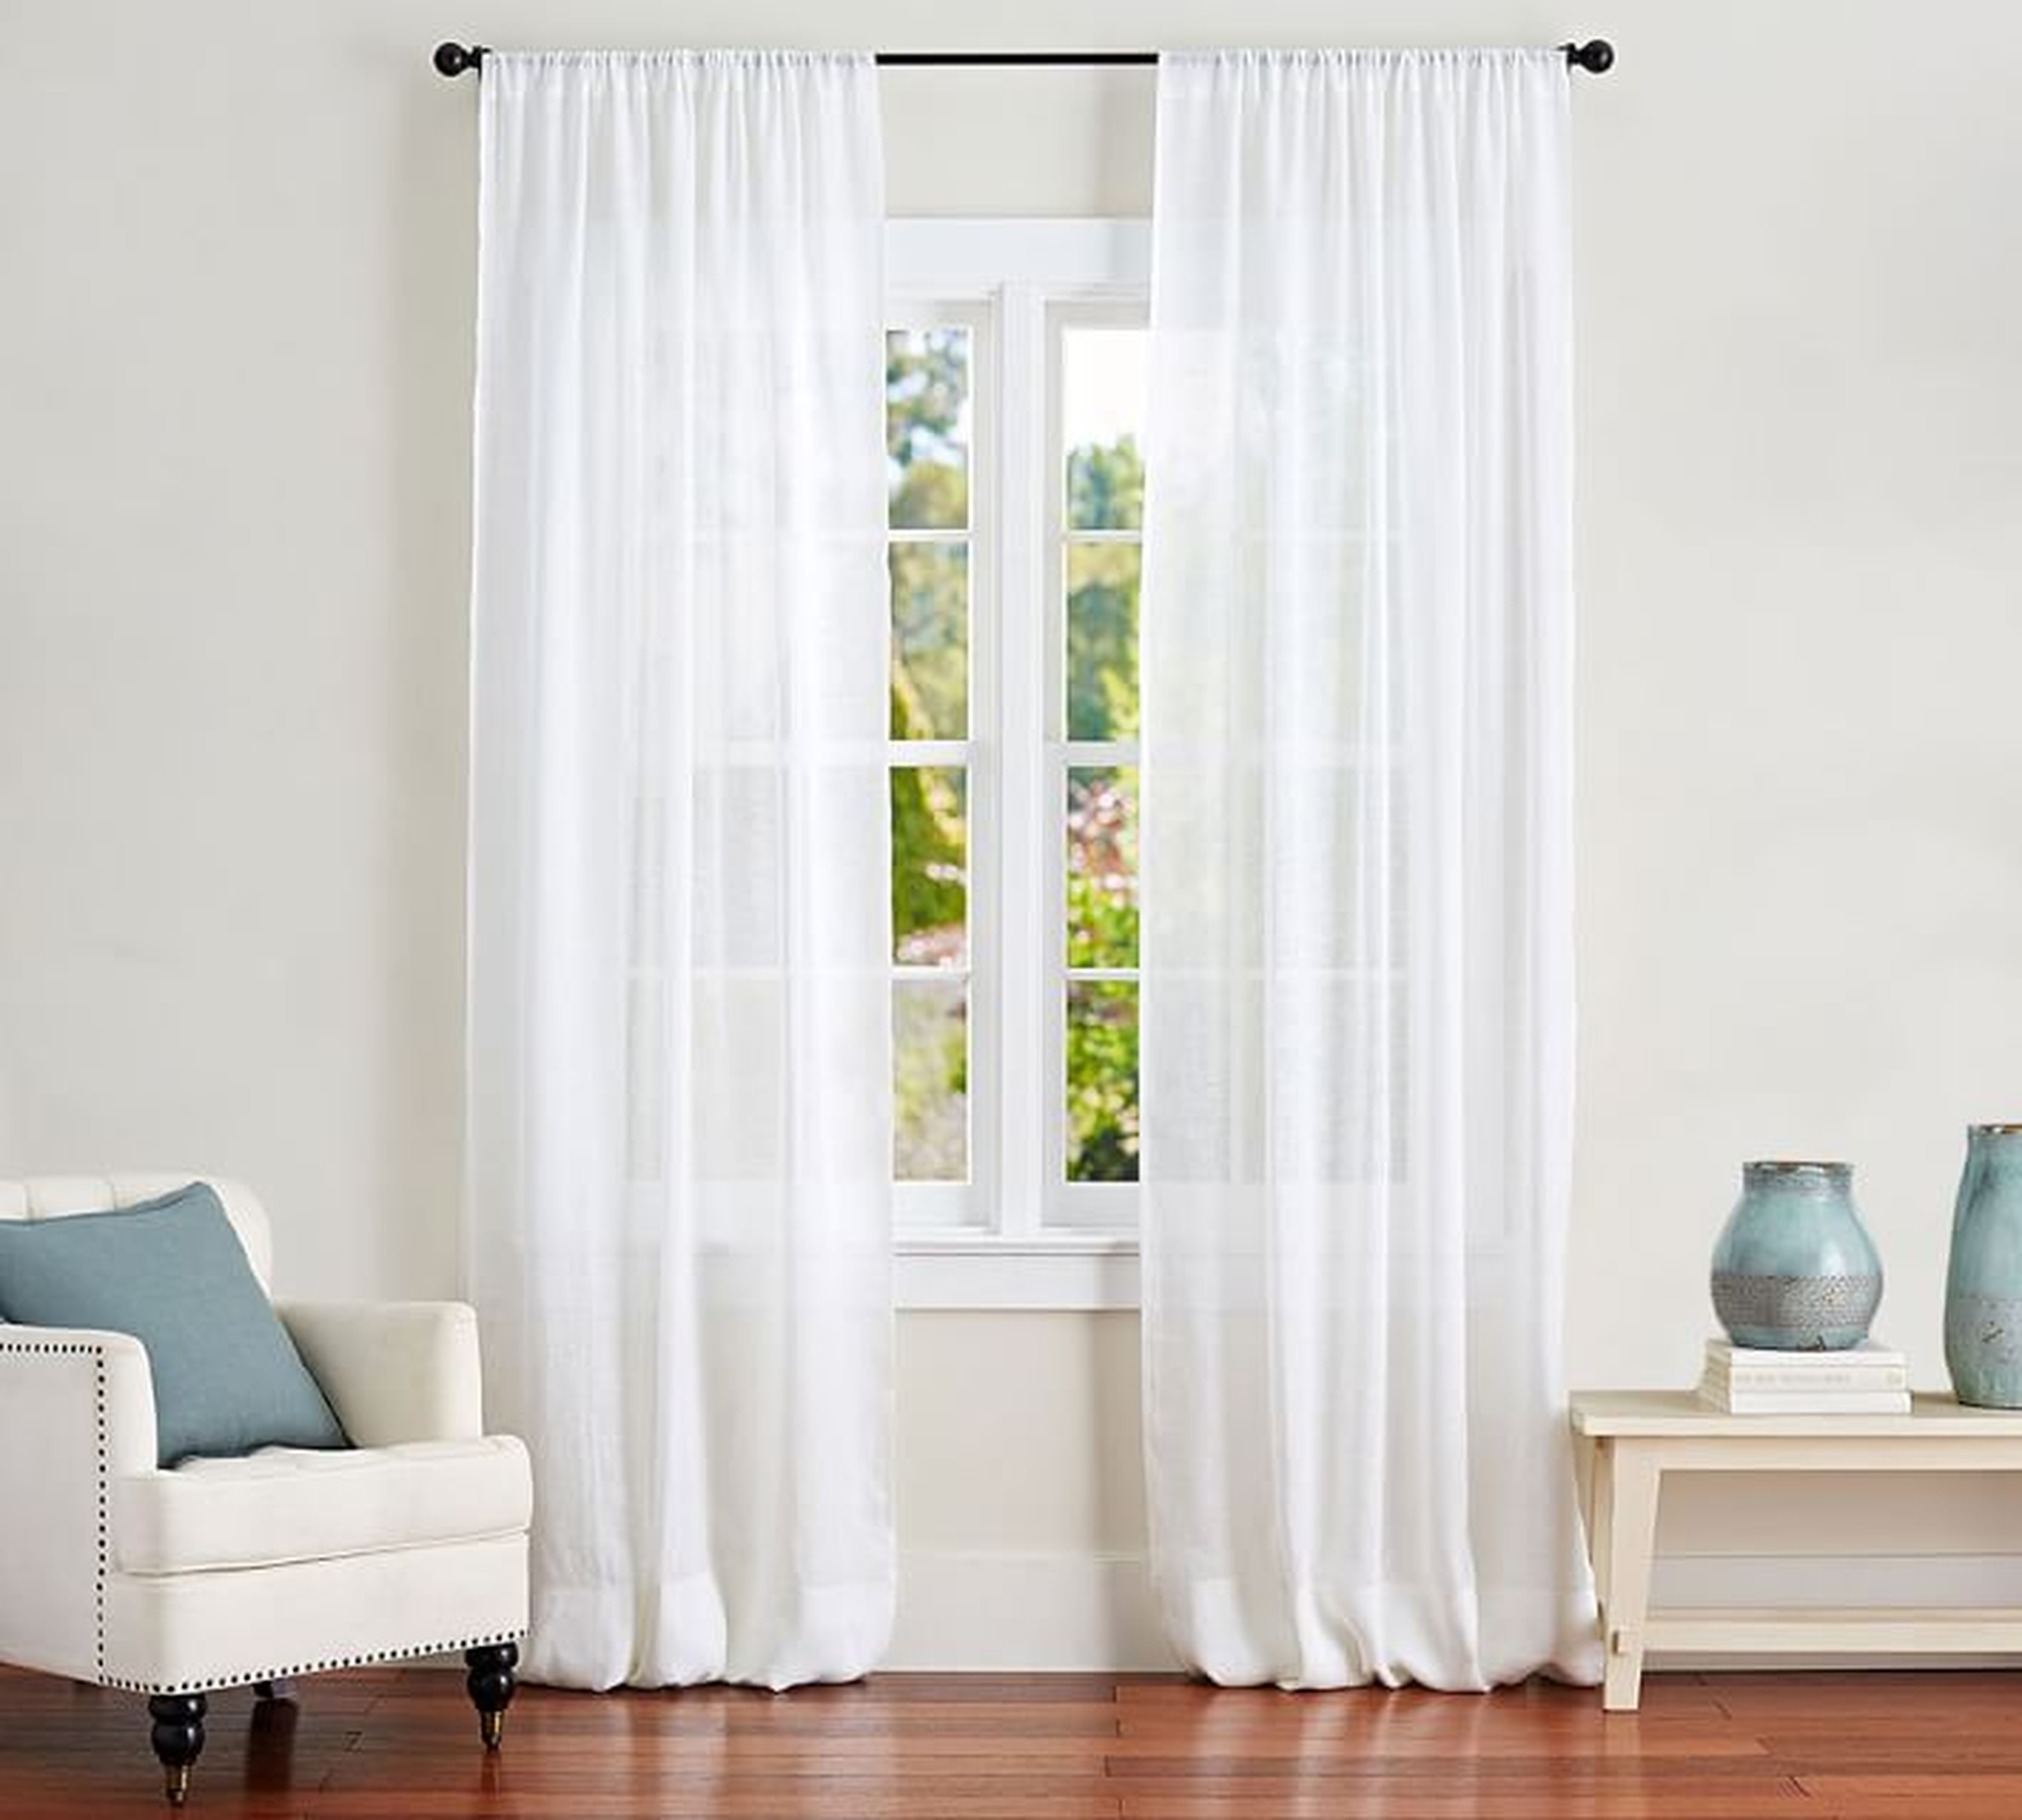 Belgian Linen Rod Pocket Sheer Curtain Made with Libeco(TM) Linen, 50 x 84", White - Pottery Barn